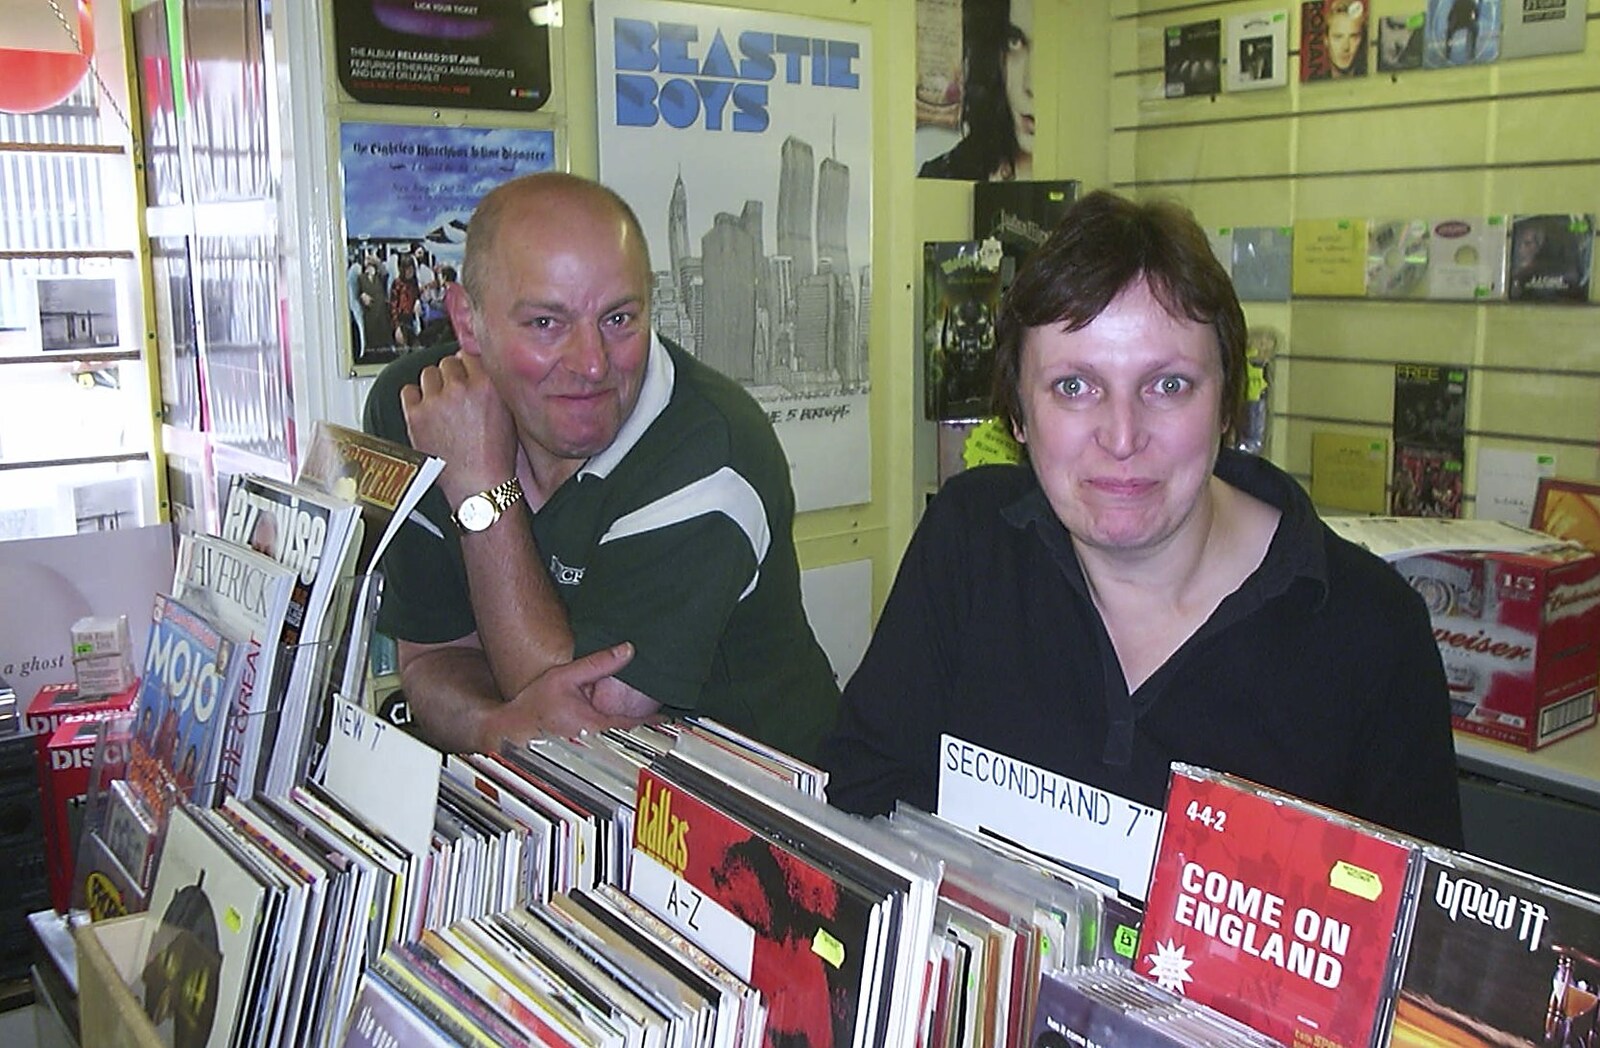 Wes and Hazel of Revs from Longview play Revolution Records, Diss, Norfolk - 2nd July 2004